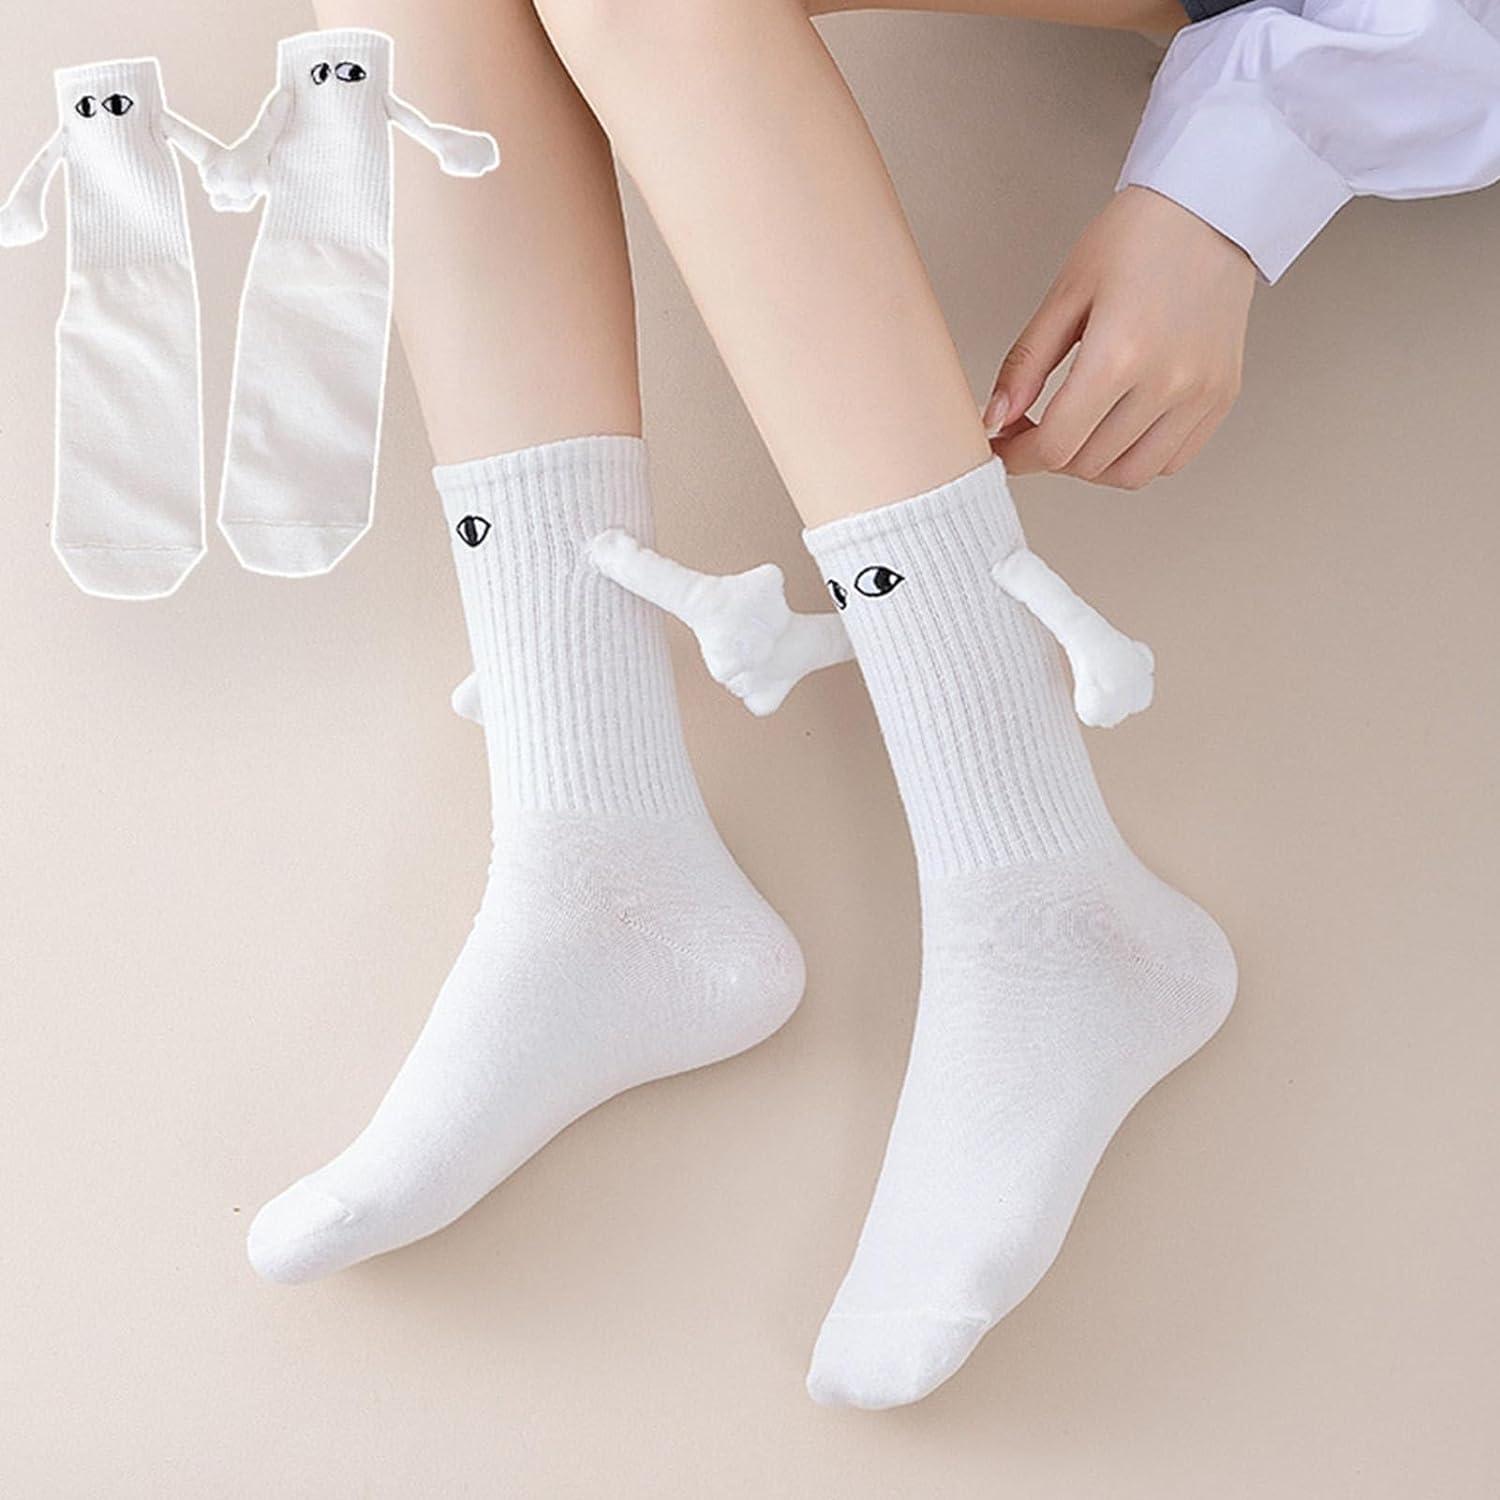 Ayammahic Funny Magnetic Suction 3D Doll Couple Socks Novelty Socks for  Women Men Couple Holding Hands Sock for Couple Gifts